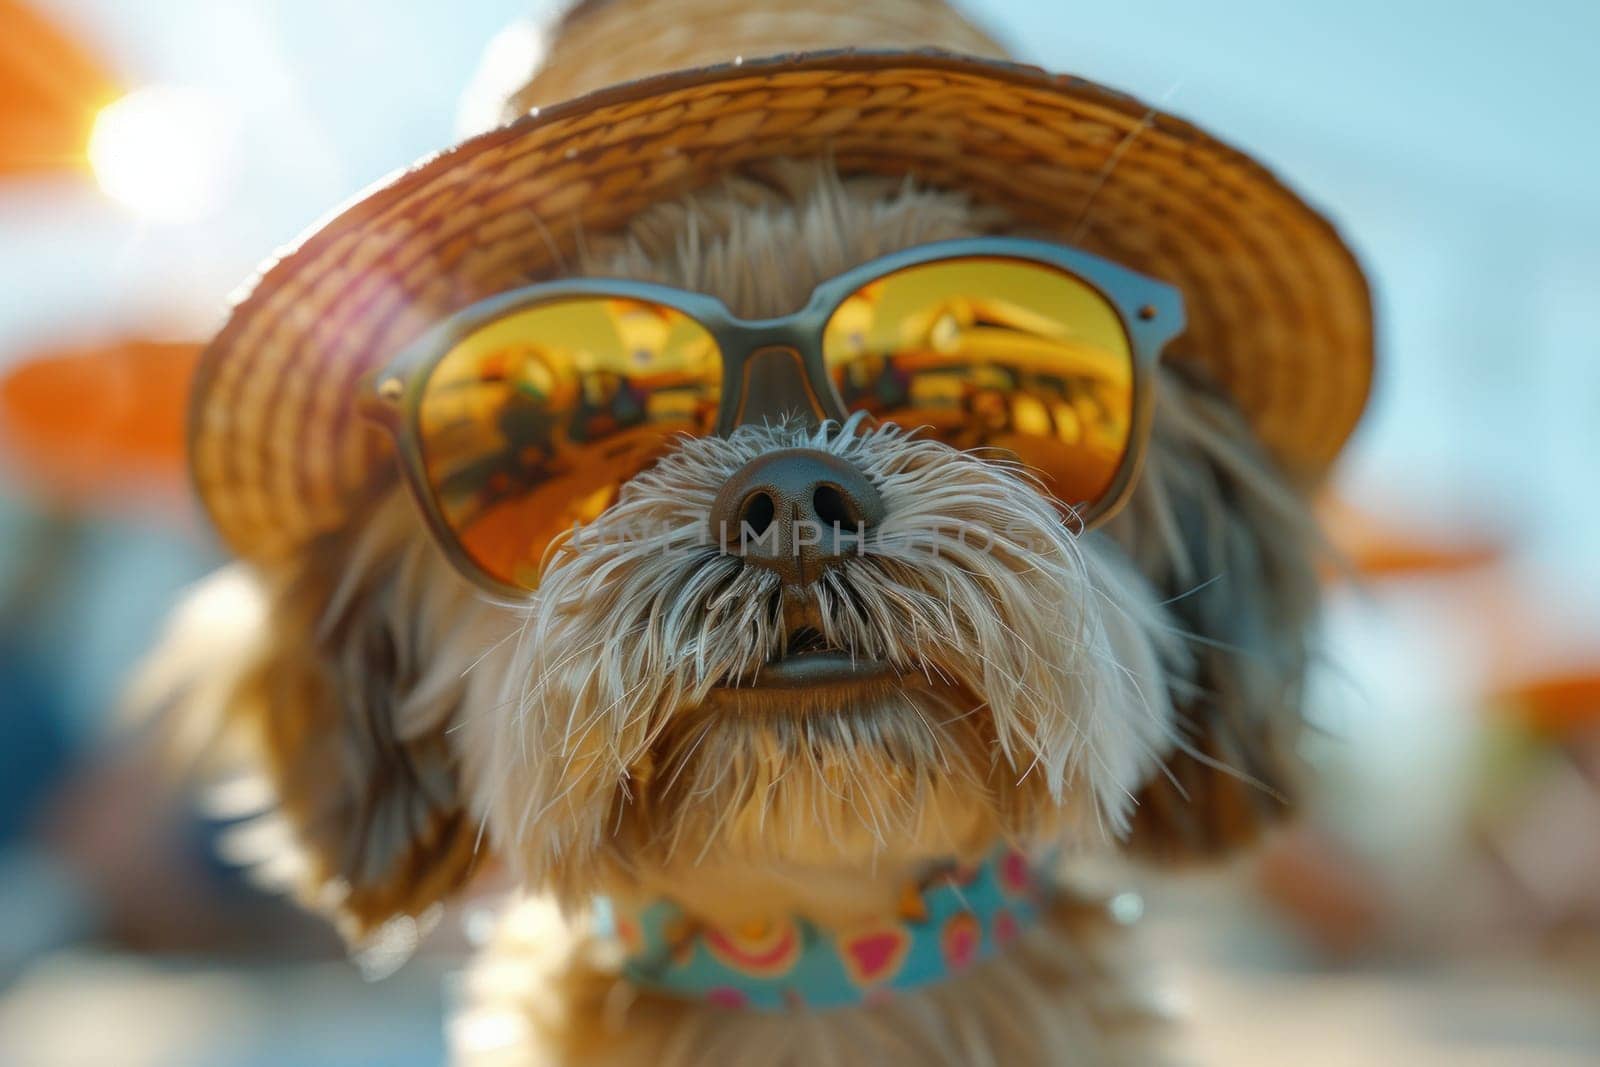 A small dog wearing sunglasses and a straw hat by golfmerrymaker